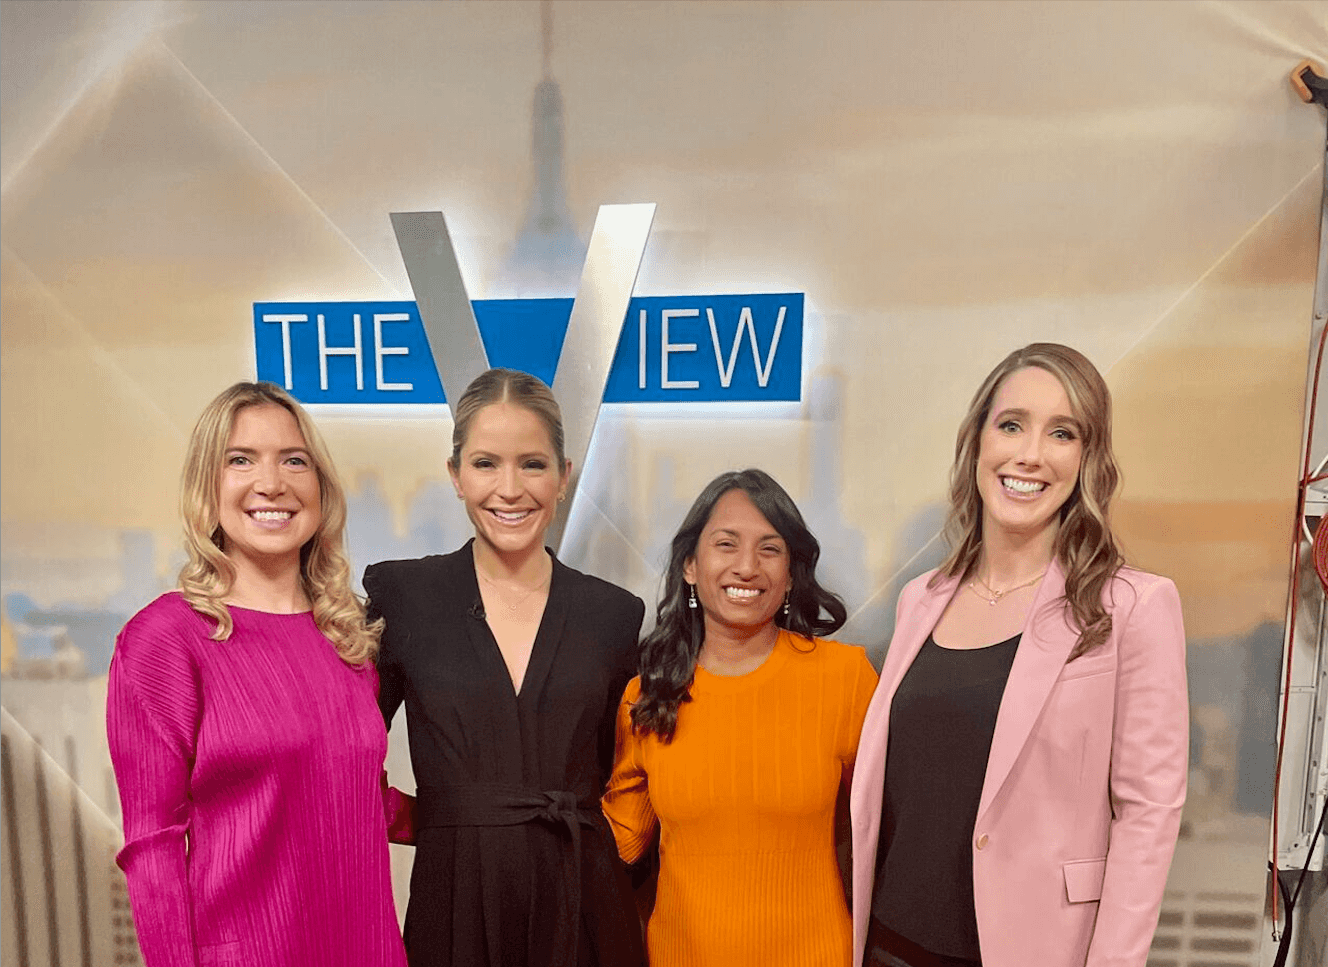 Just Date founder, Sylvia Charles, M.D. and CEO, Samantha Abramson, appear on ABC’s The View